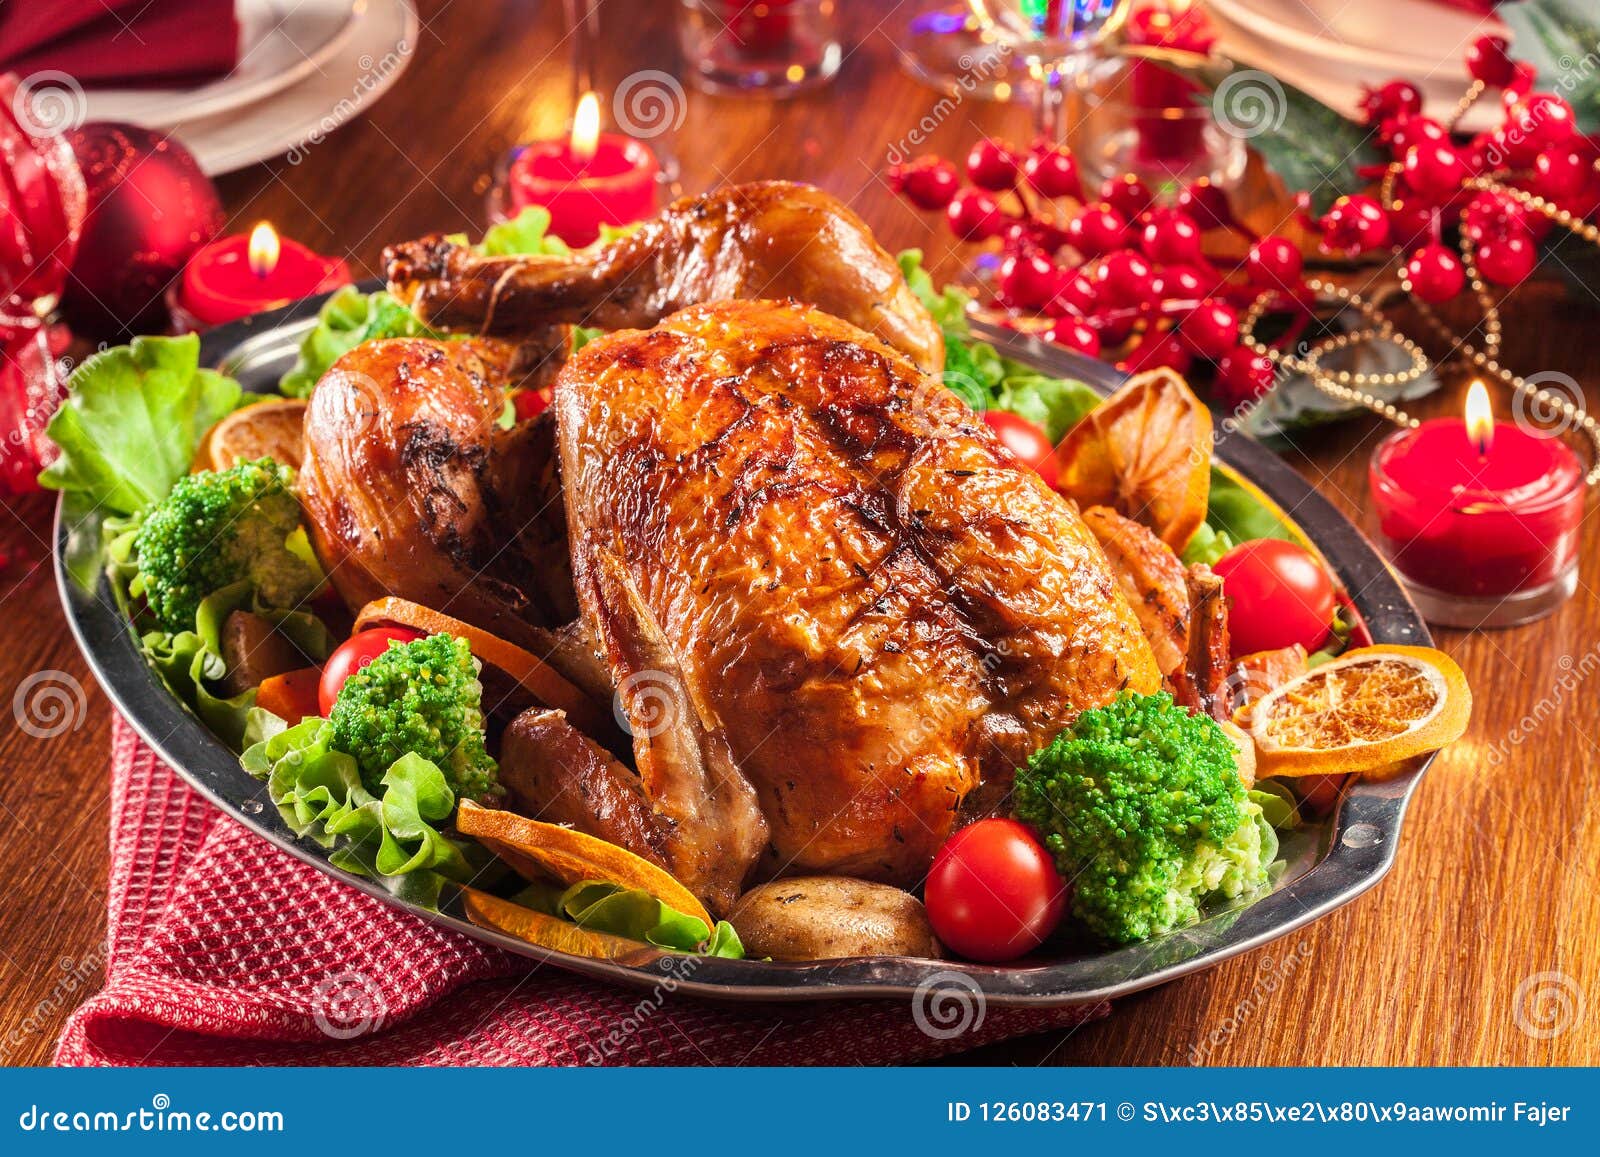 Baked or Roasted Whole Chicken on Christmas Table Stock Image - Image ...